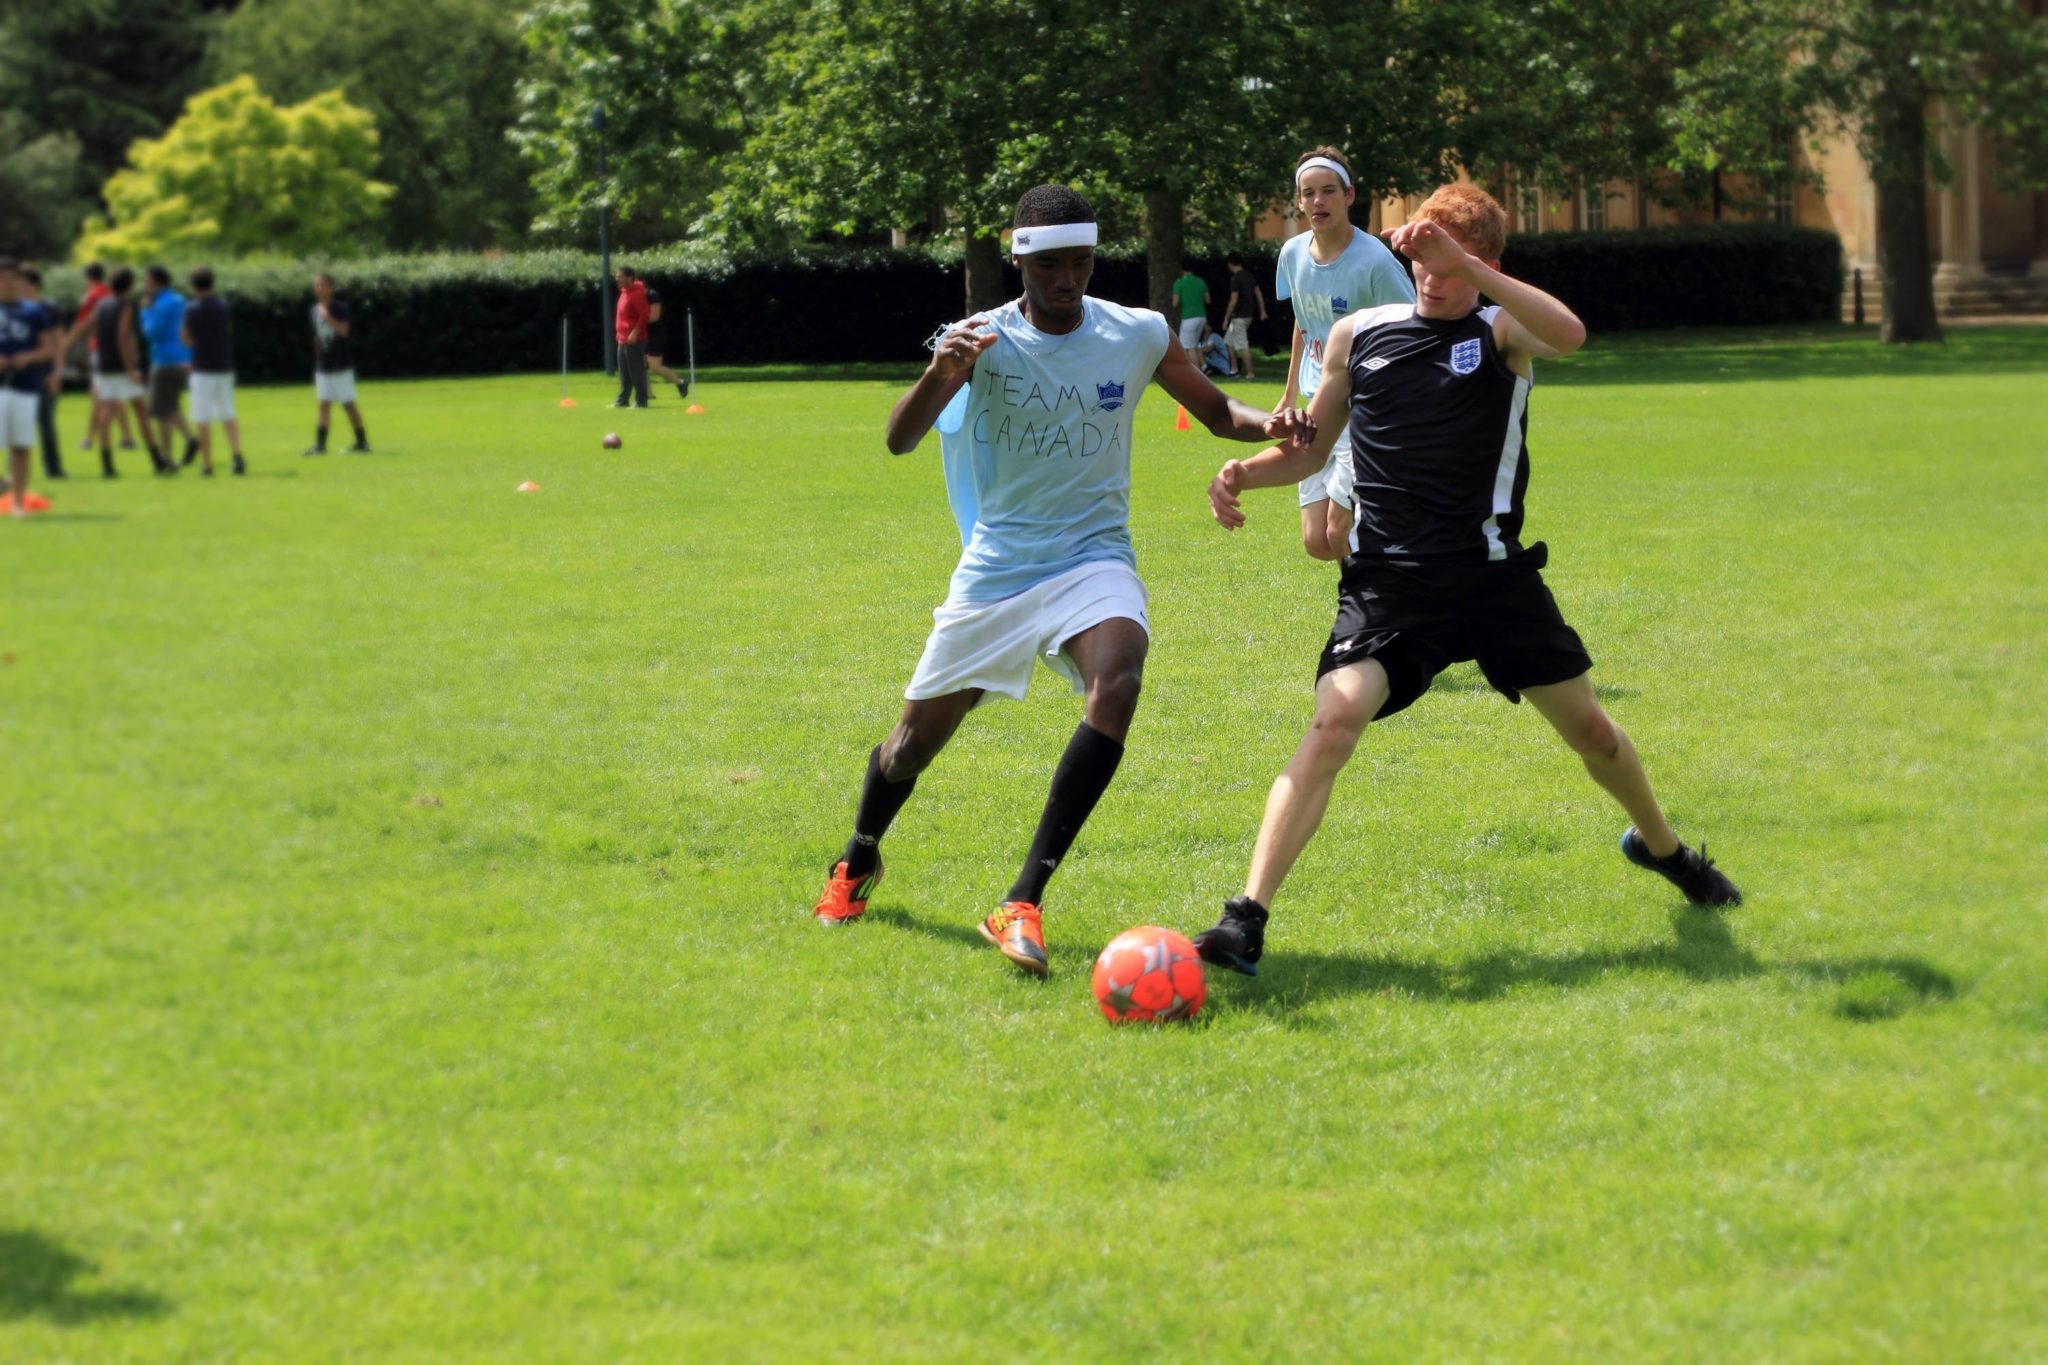 Two students play football on a green field. One student has red hair and is wearing their own sports kit, and the other student is wearing a customised 'Reach Cambridge' T-shirt. They are both running for the ball.